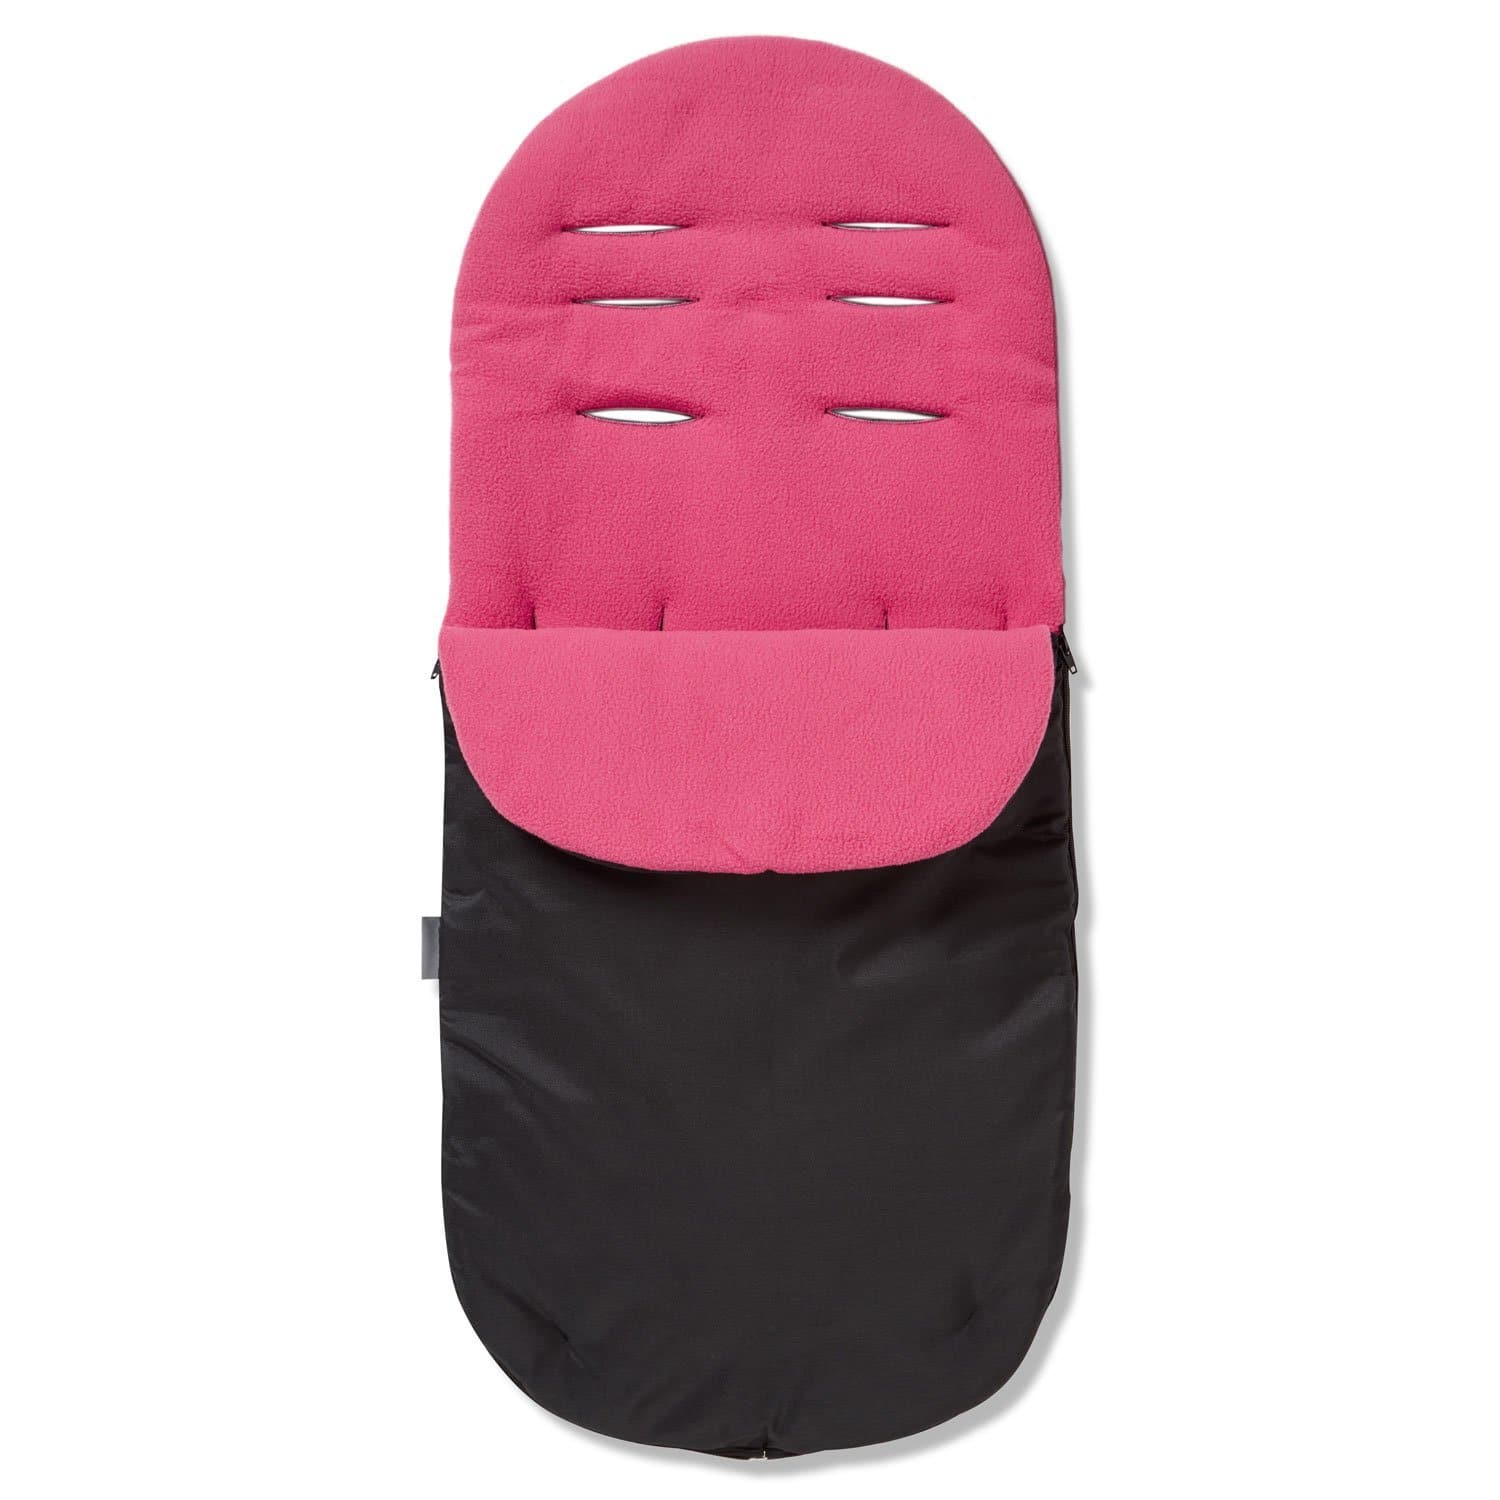 Footmuff / Cosy Toes Compatible with Mee-Go - Dark Pink / Fits All Models | For Your Little One